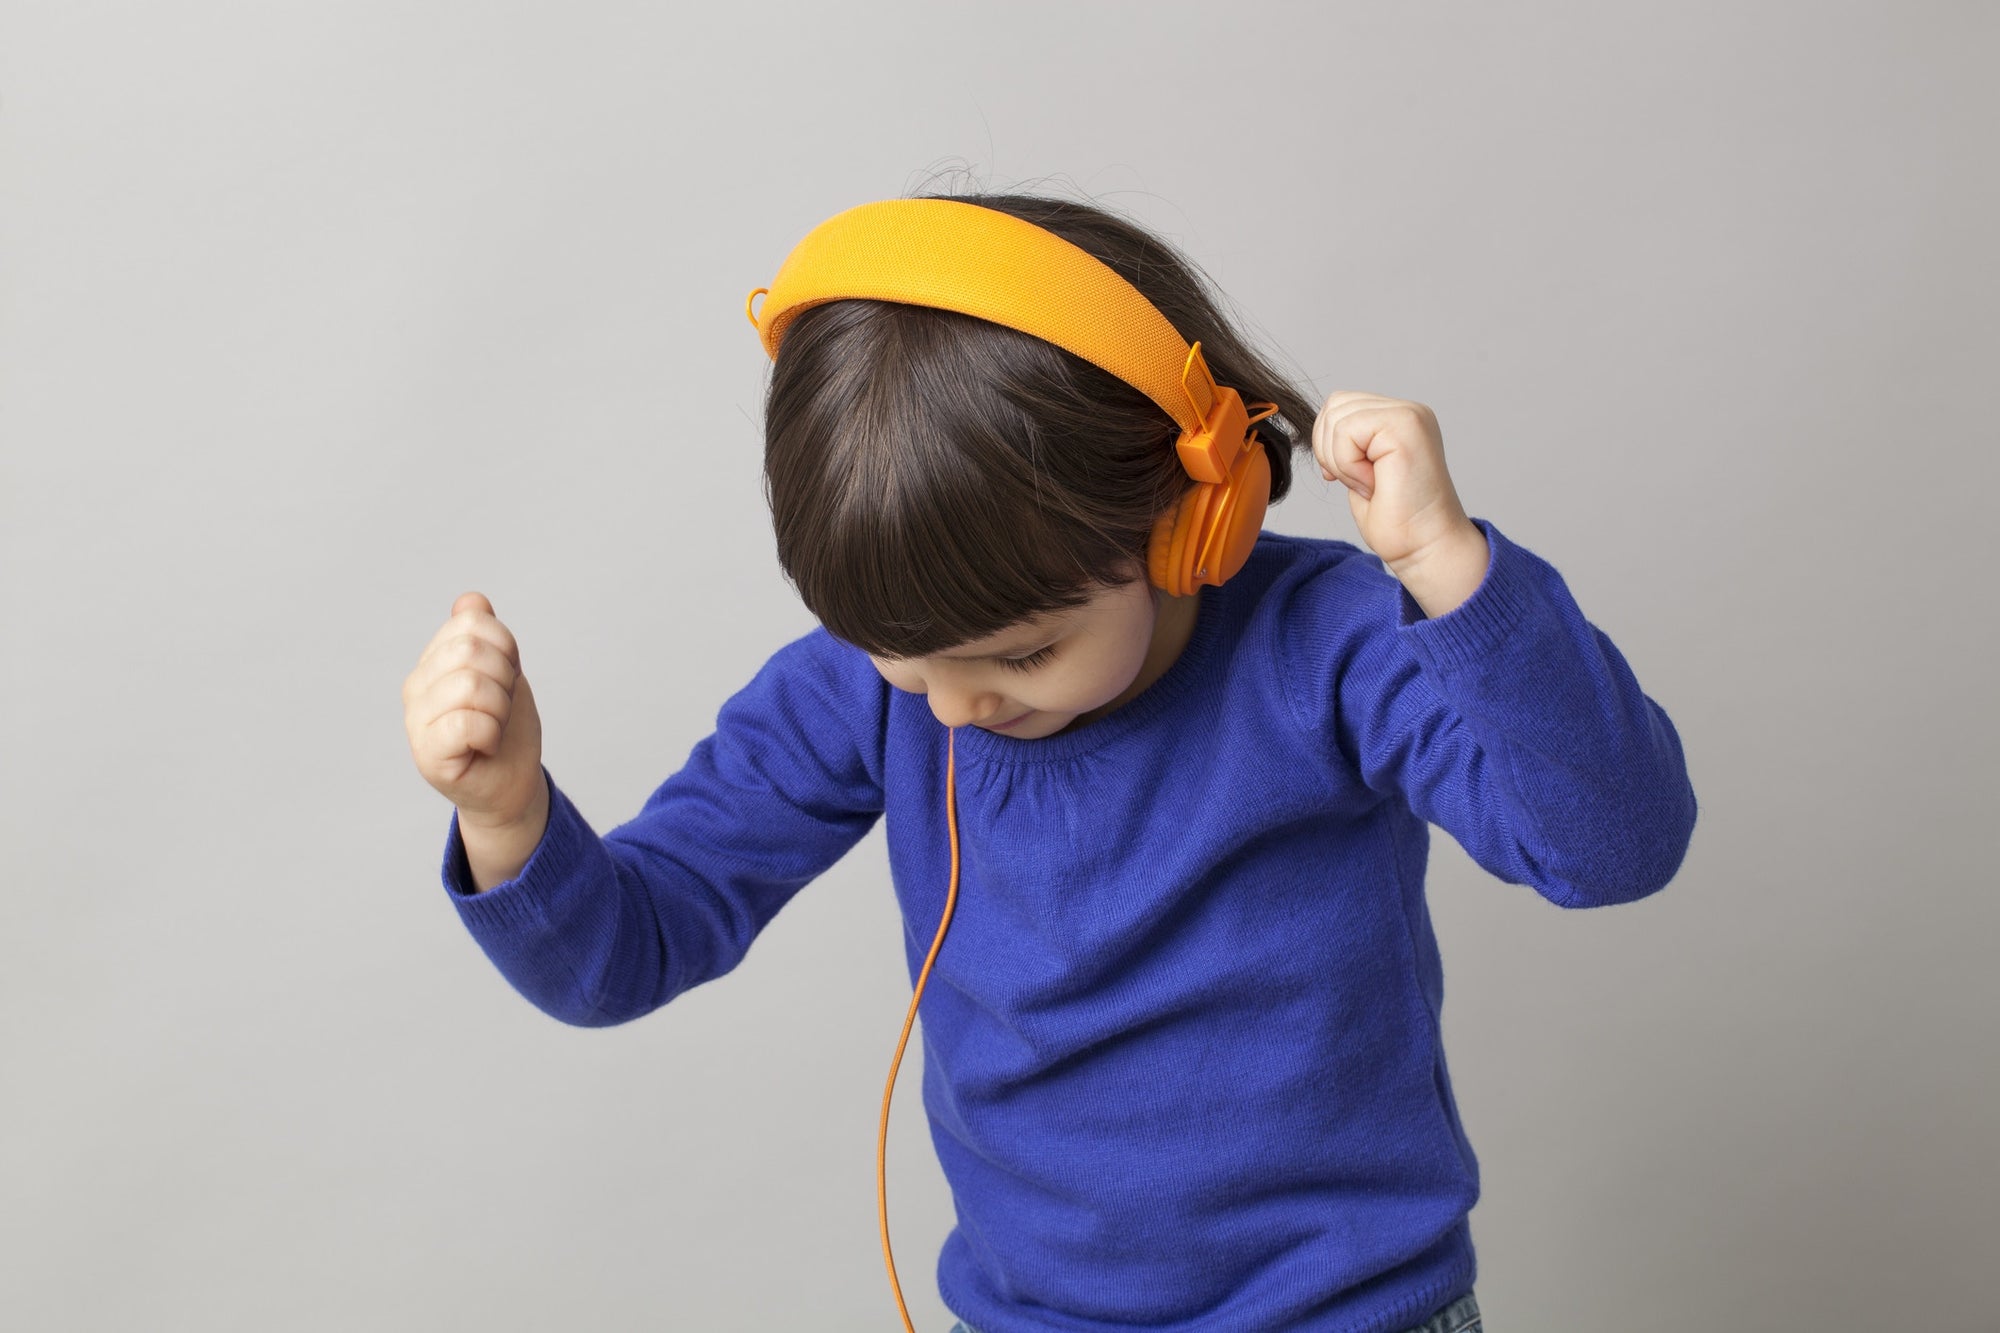 young boy listen music with headphone